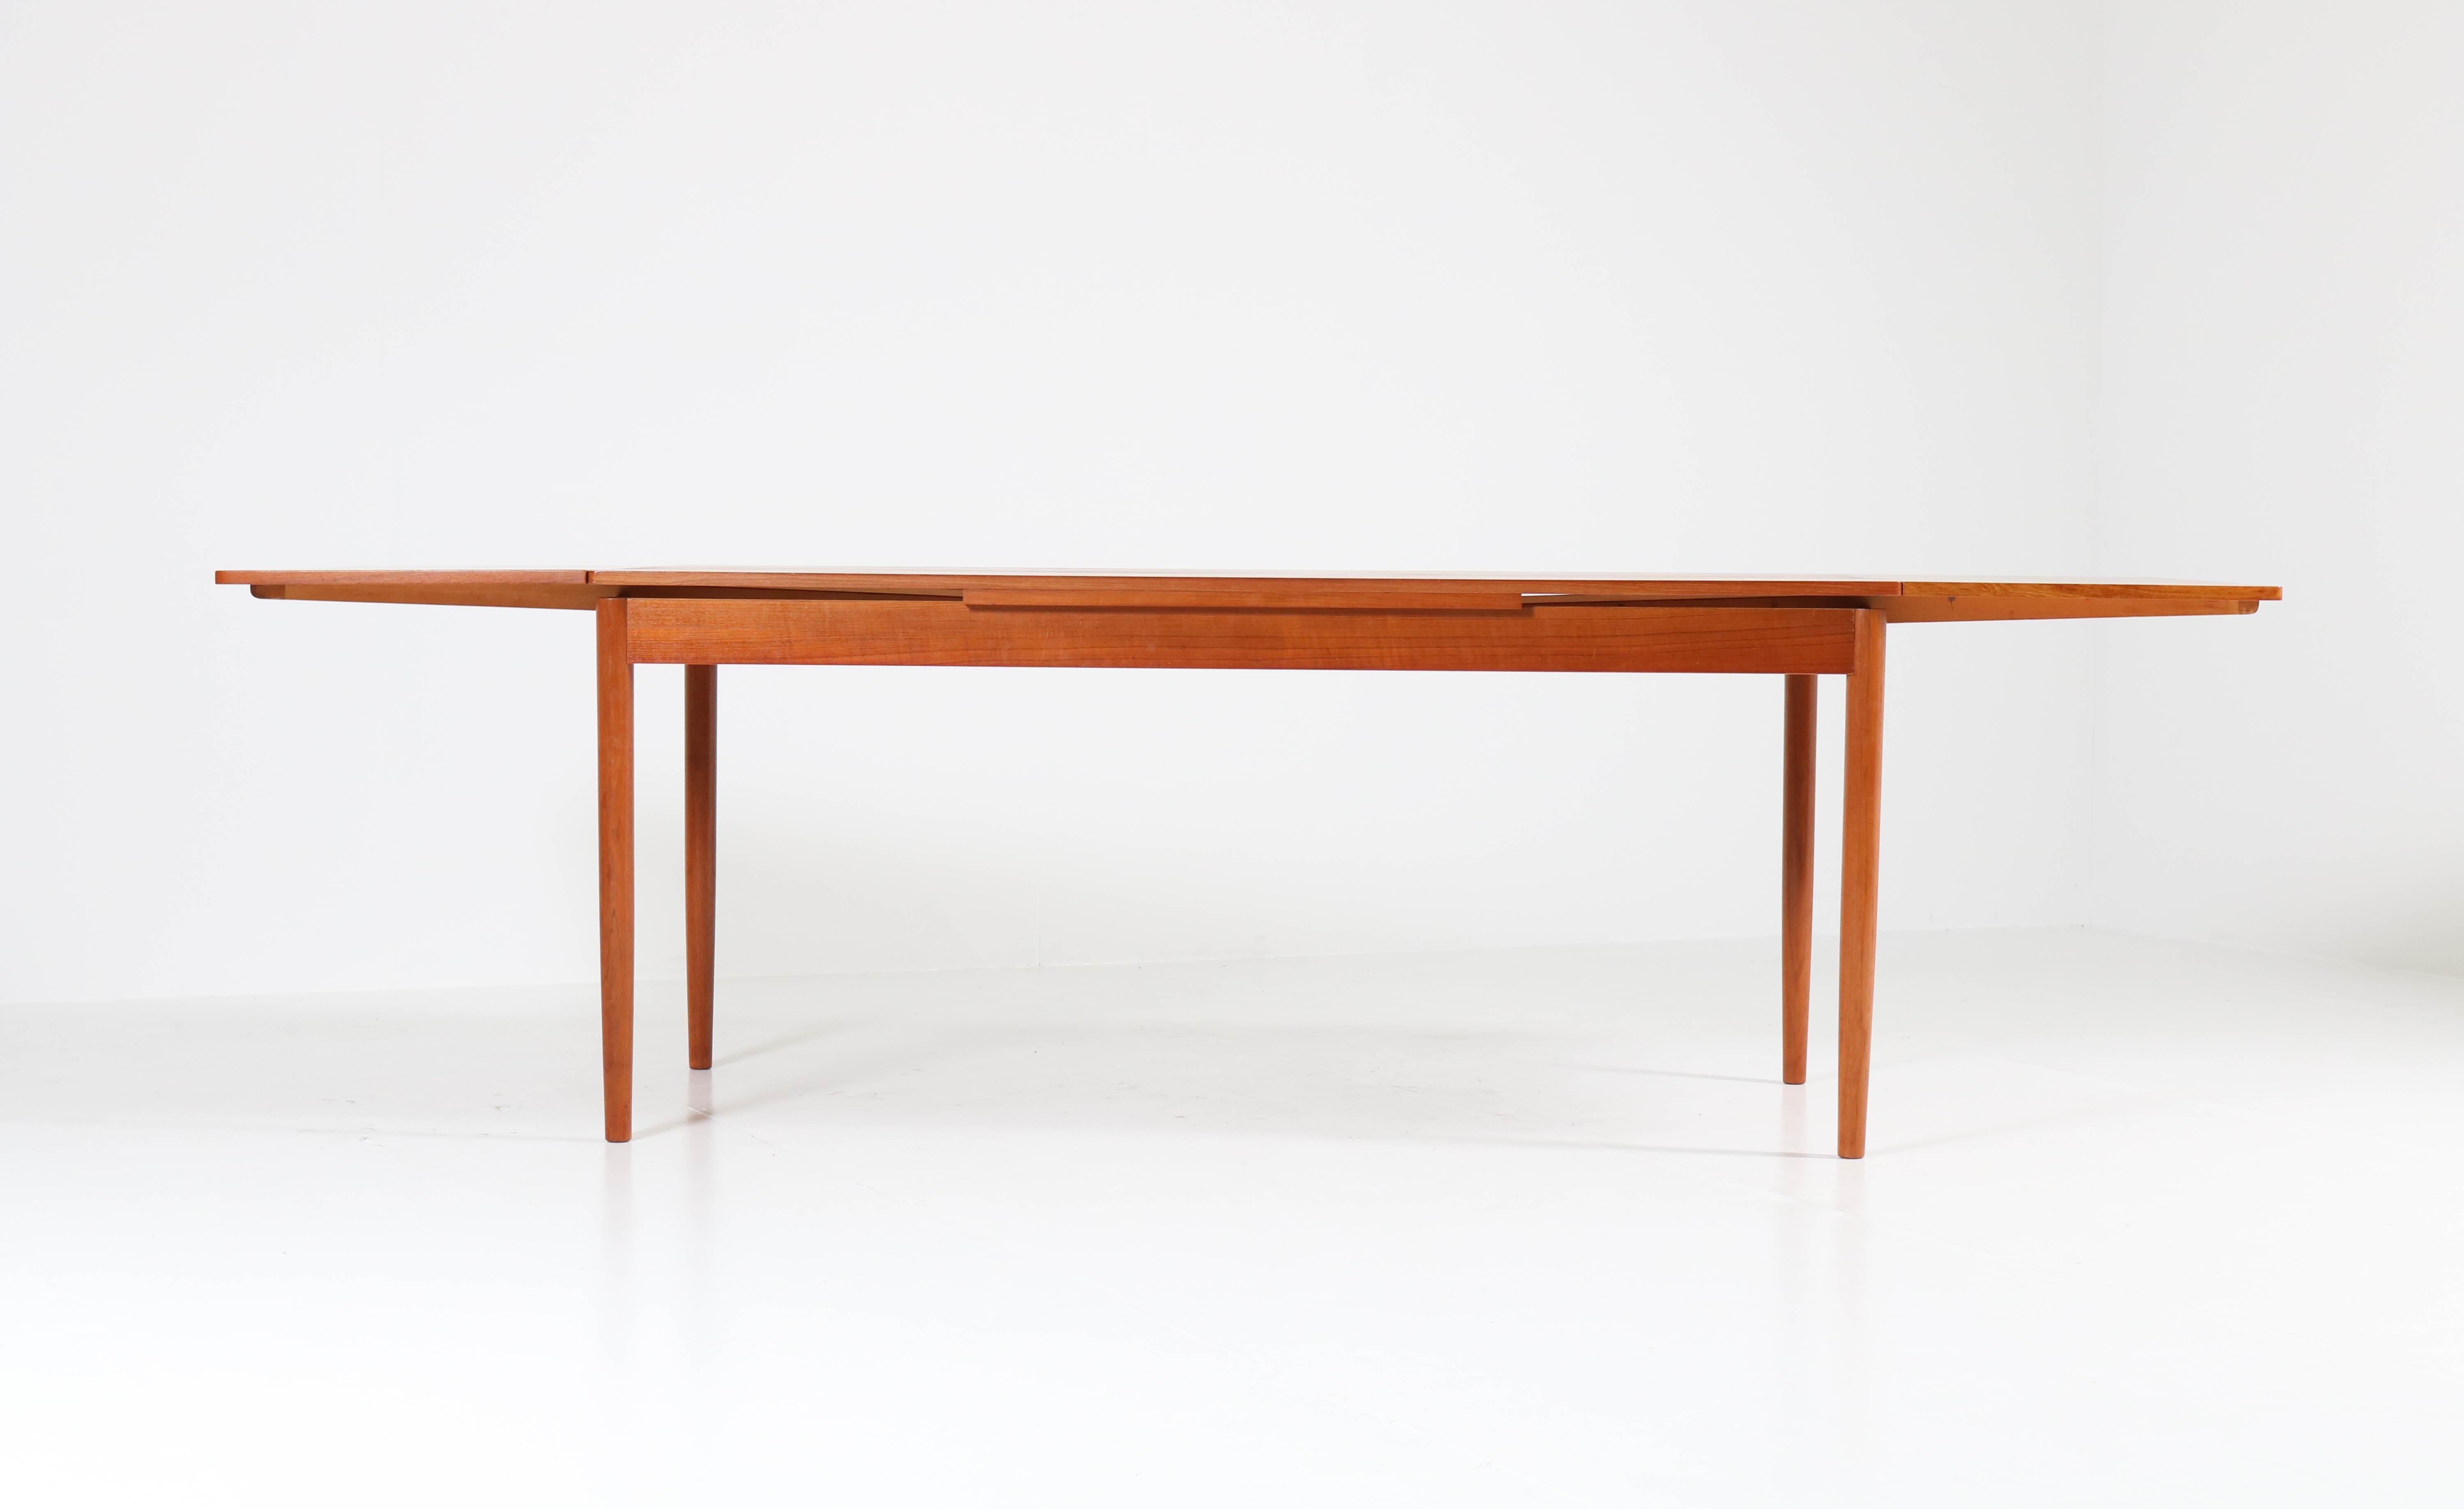 Funky Mid-Century Modern extendable table.
Striking Dutch design from the sixties.
Solid teak legs with teak veneered tops.
Table can be dismantled into five pieces for safe transport.
In good original condition with minor wear consistent with